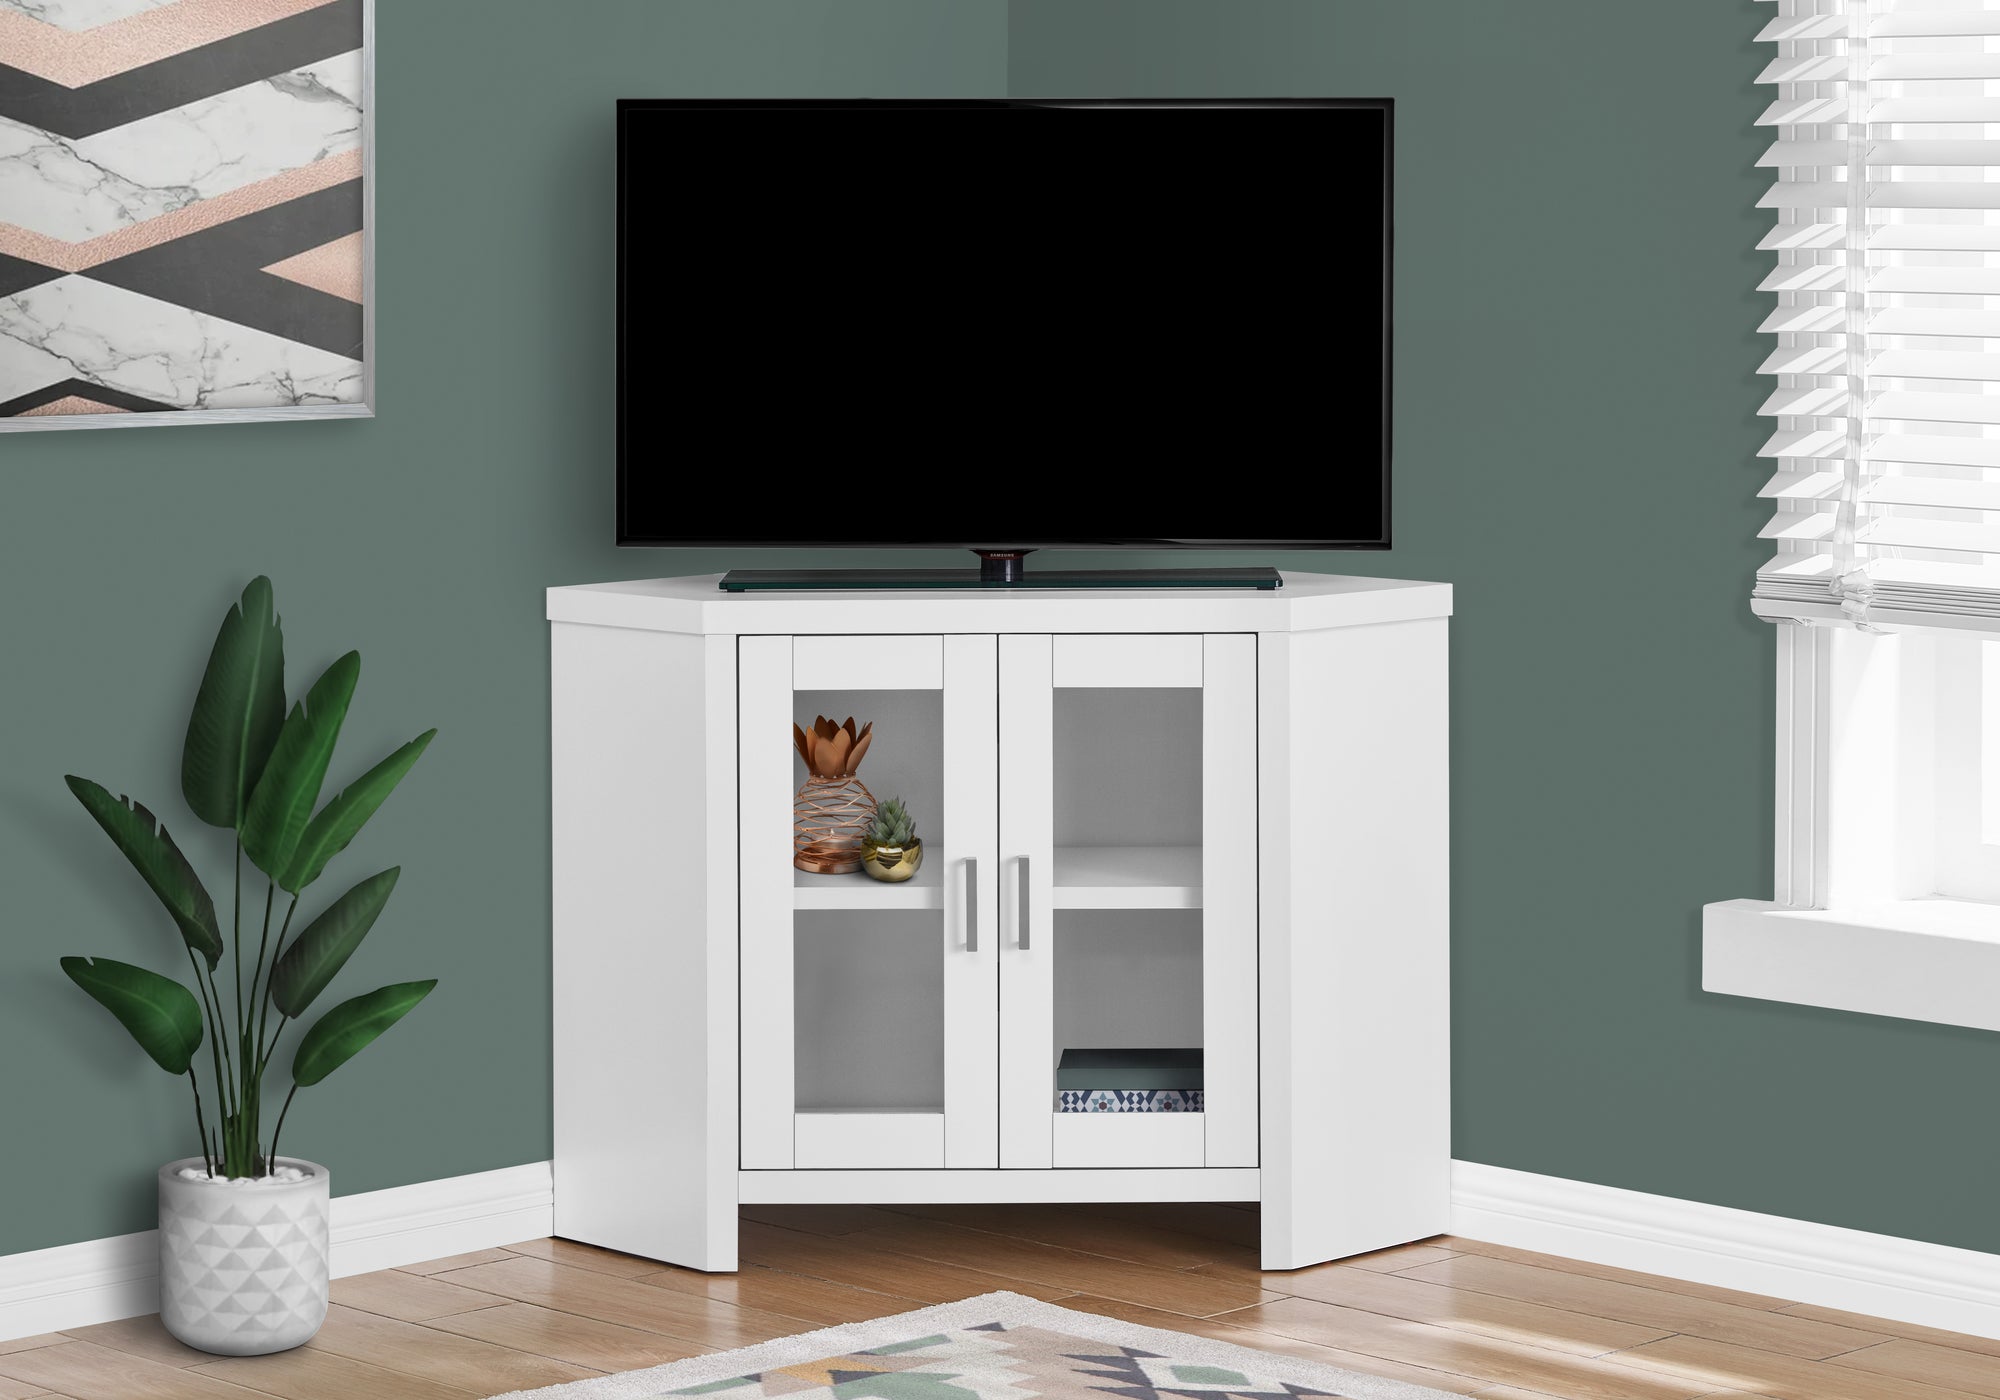 MN-942703    Tv Stand, 42Inch, Console, Media Entertainment Center, Storage Cabinet, Living Room, Bedroom, Laminate, Tempered Glass, White, Contemporary, Modern